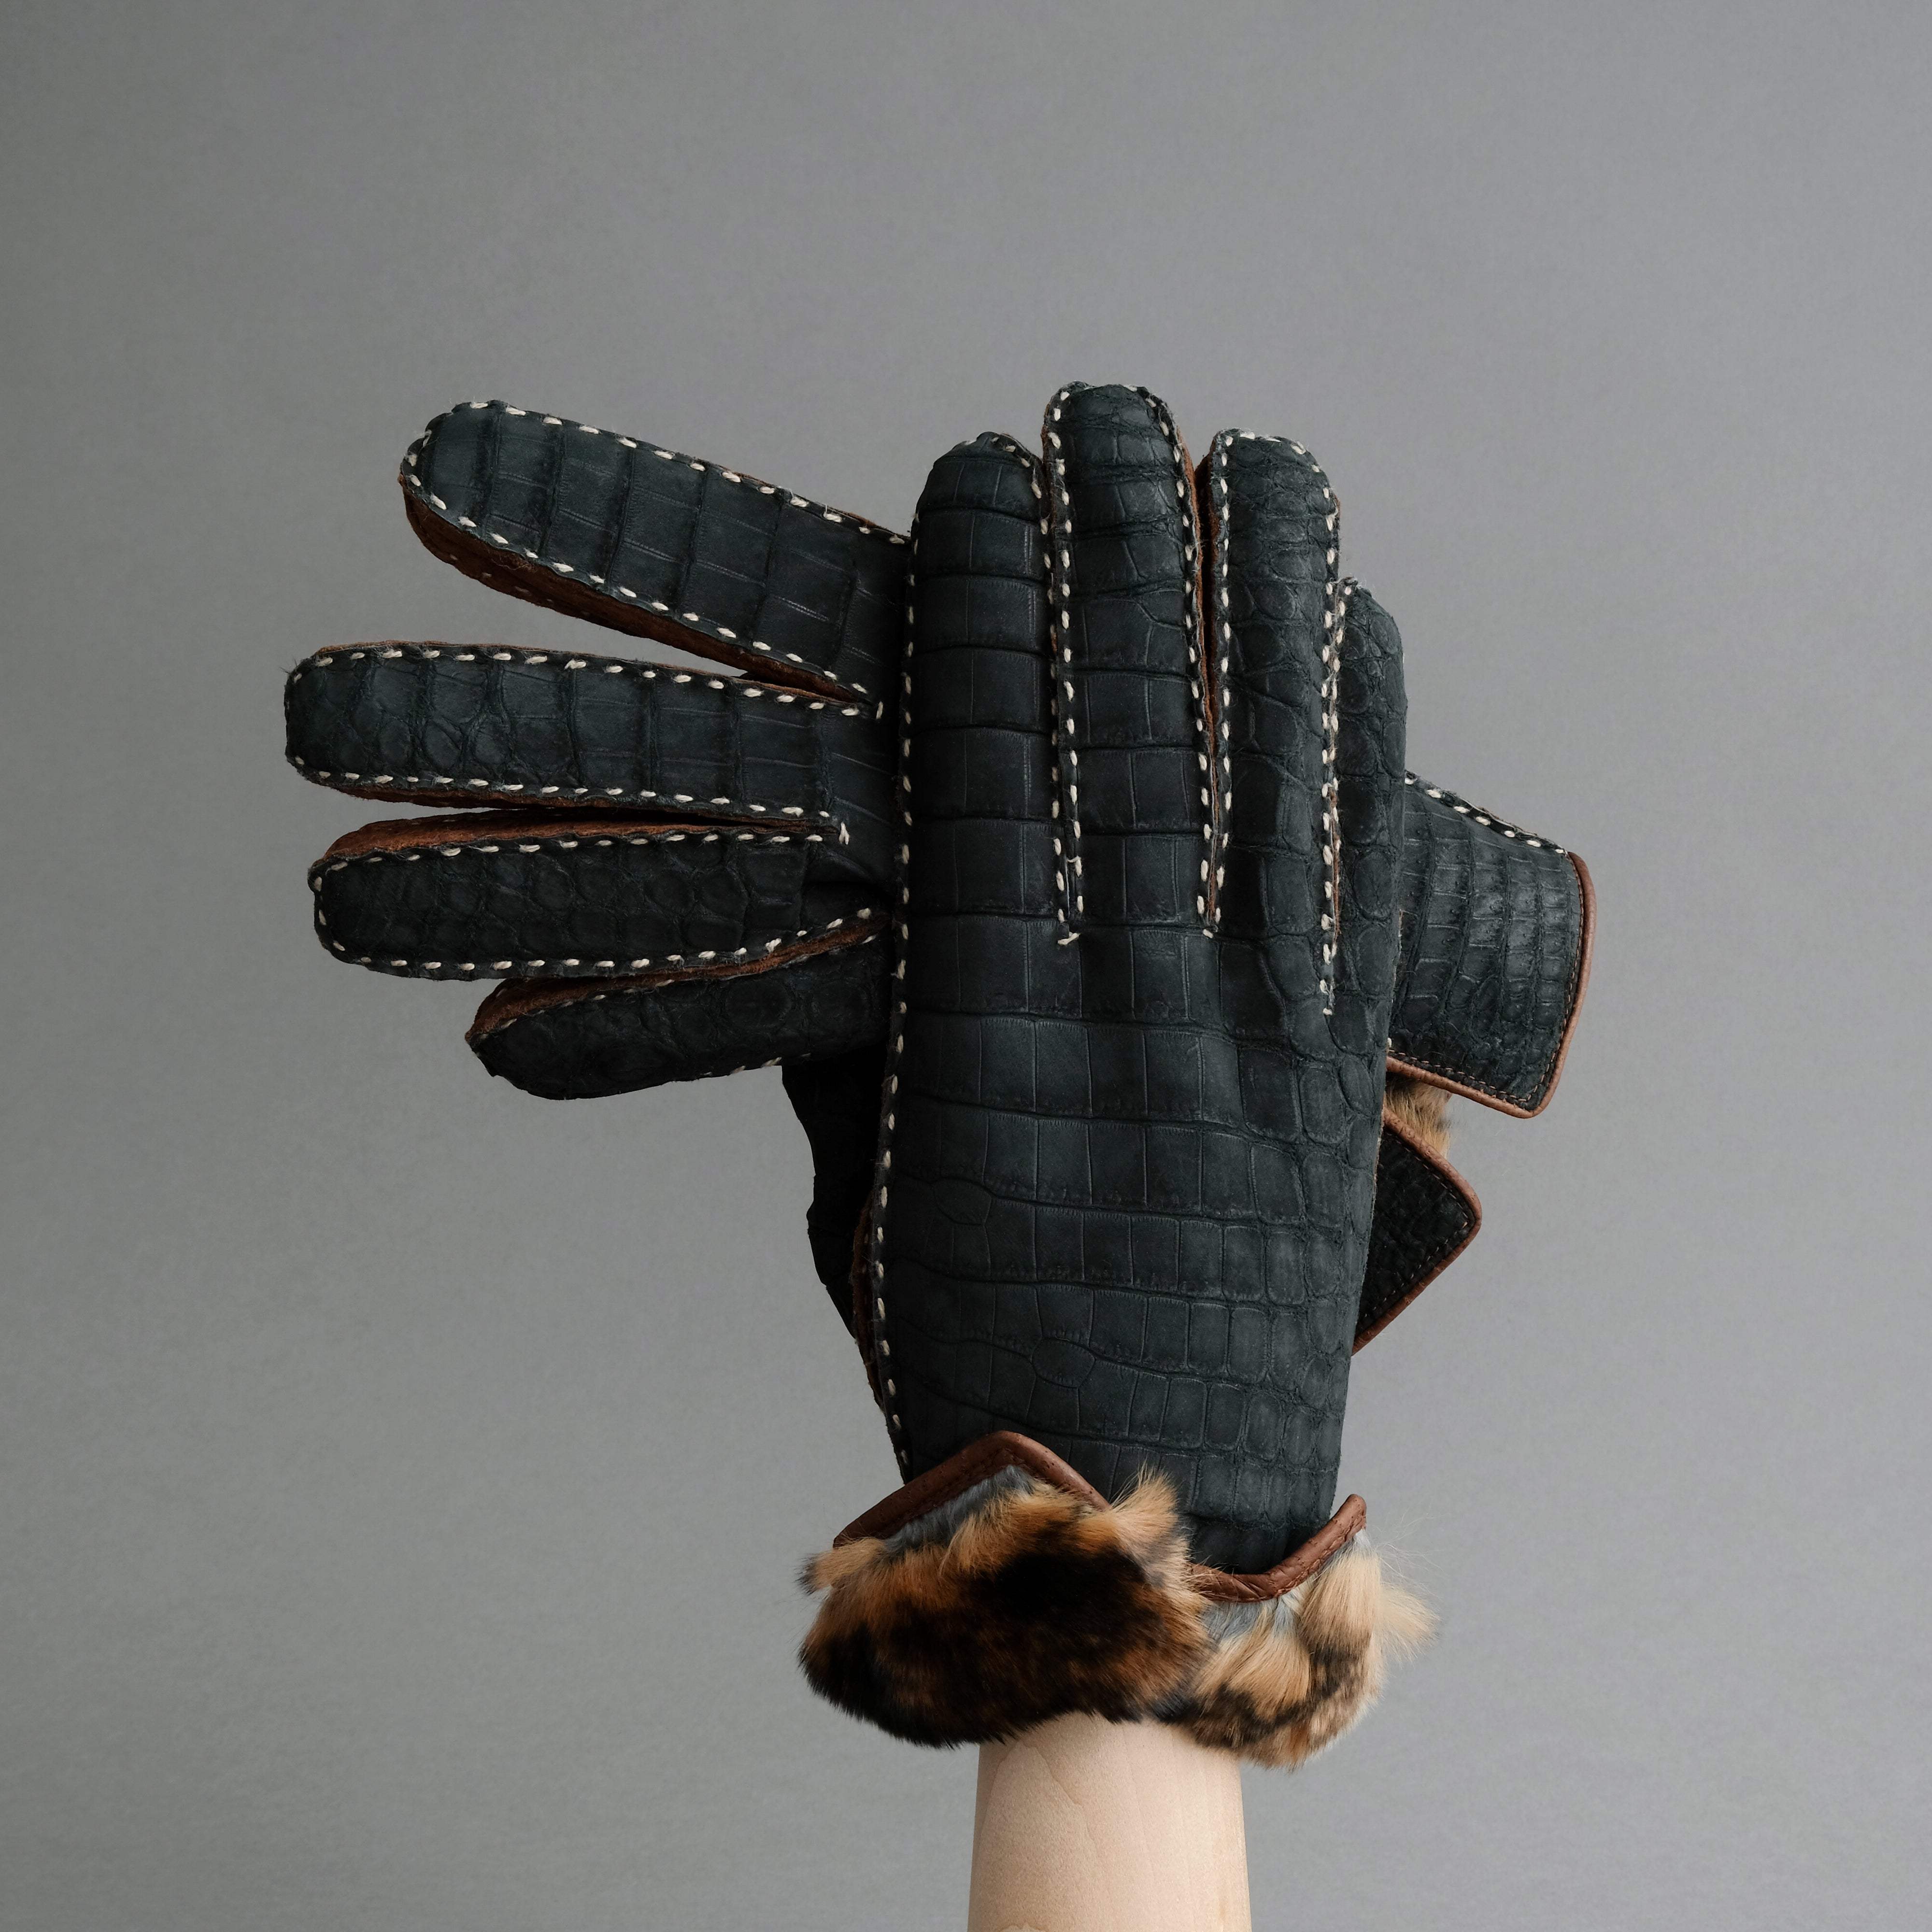 Gentlemen's Gloves from Crocodile and Peccary Leather - TR Handschuhe Wien - Thomas Riemer Handmade Gloves